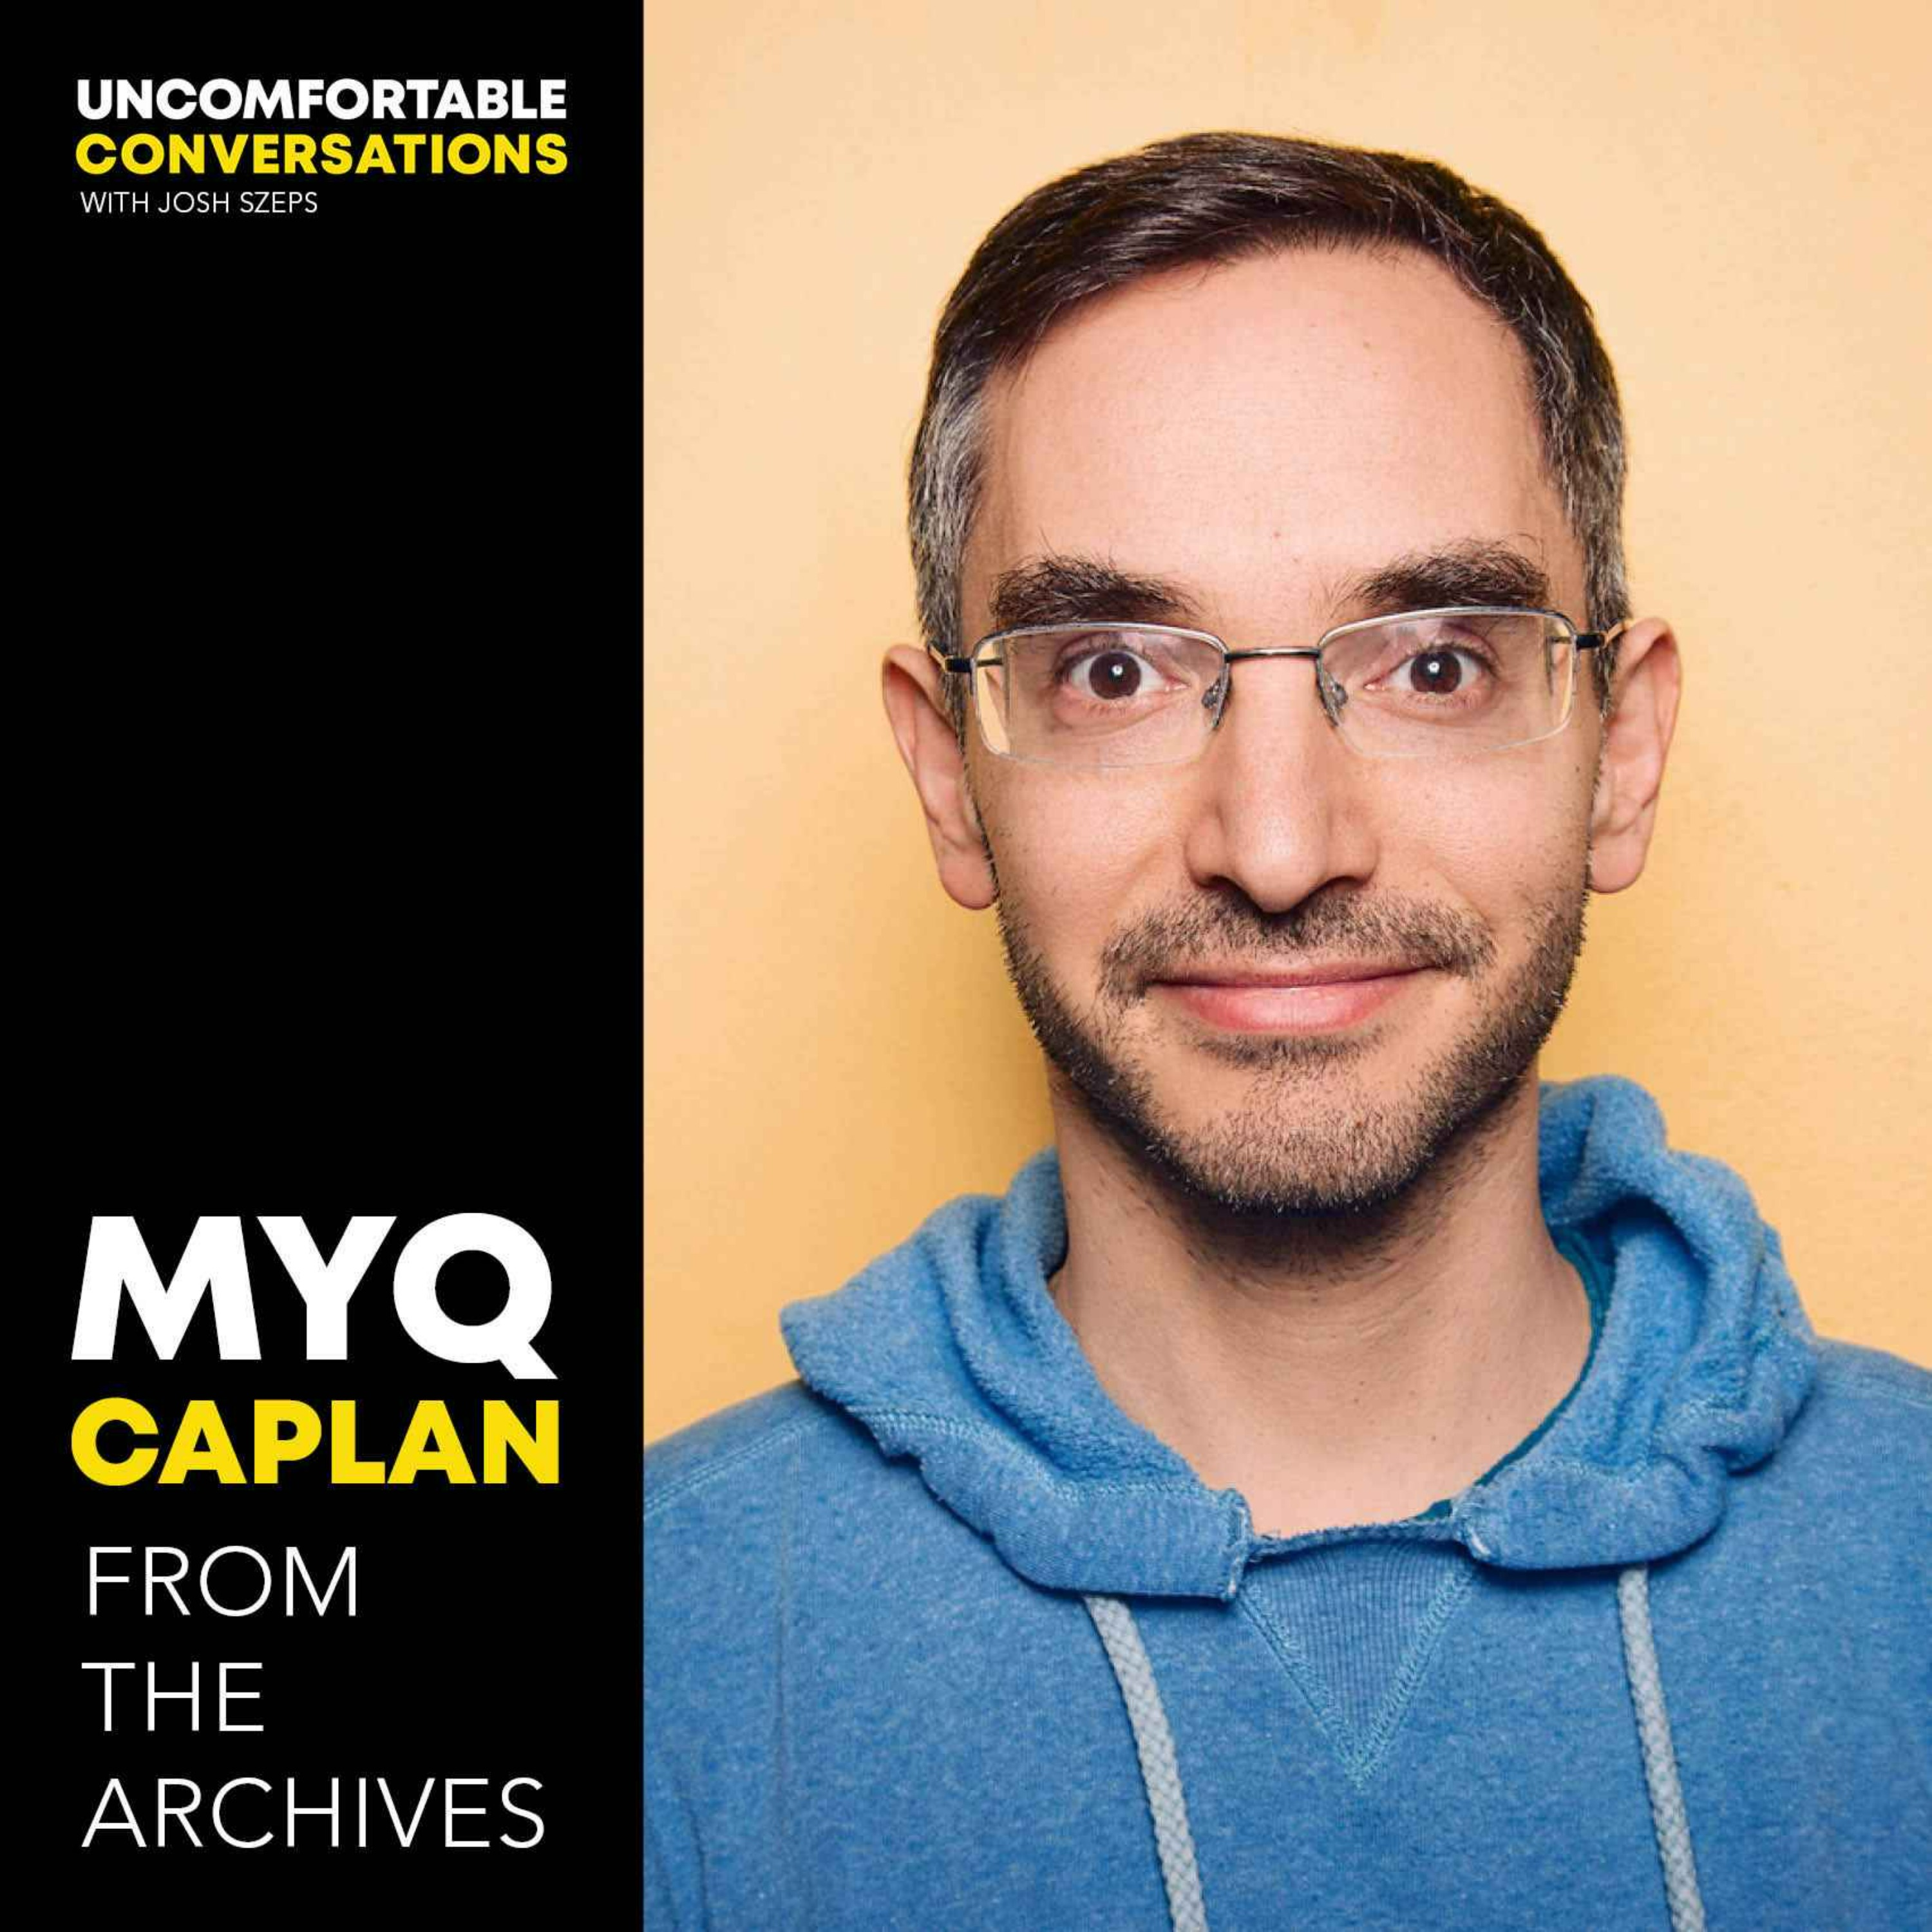 Premium: Myq Caplan - From The Archives